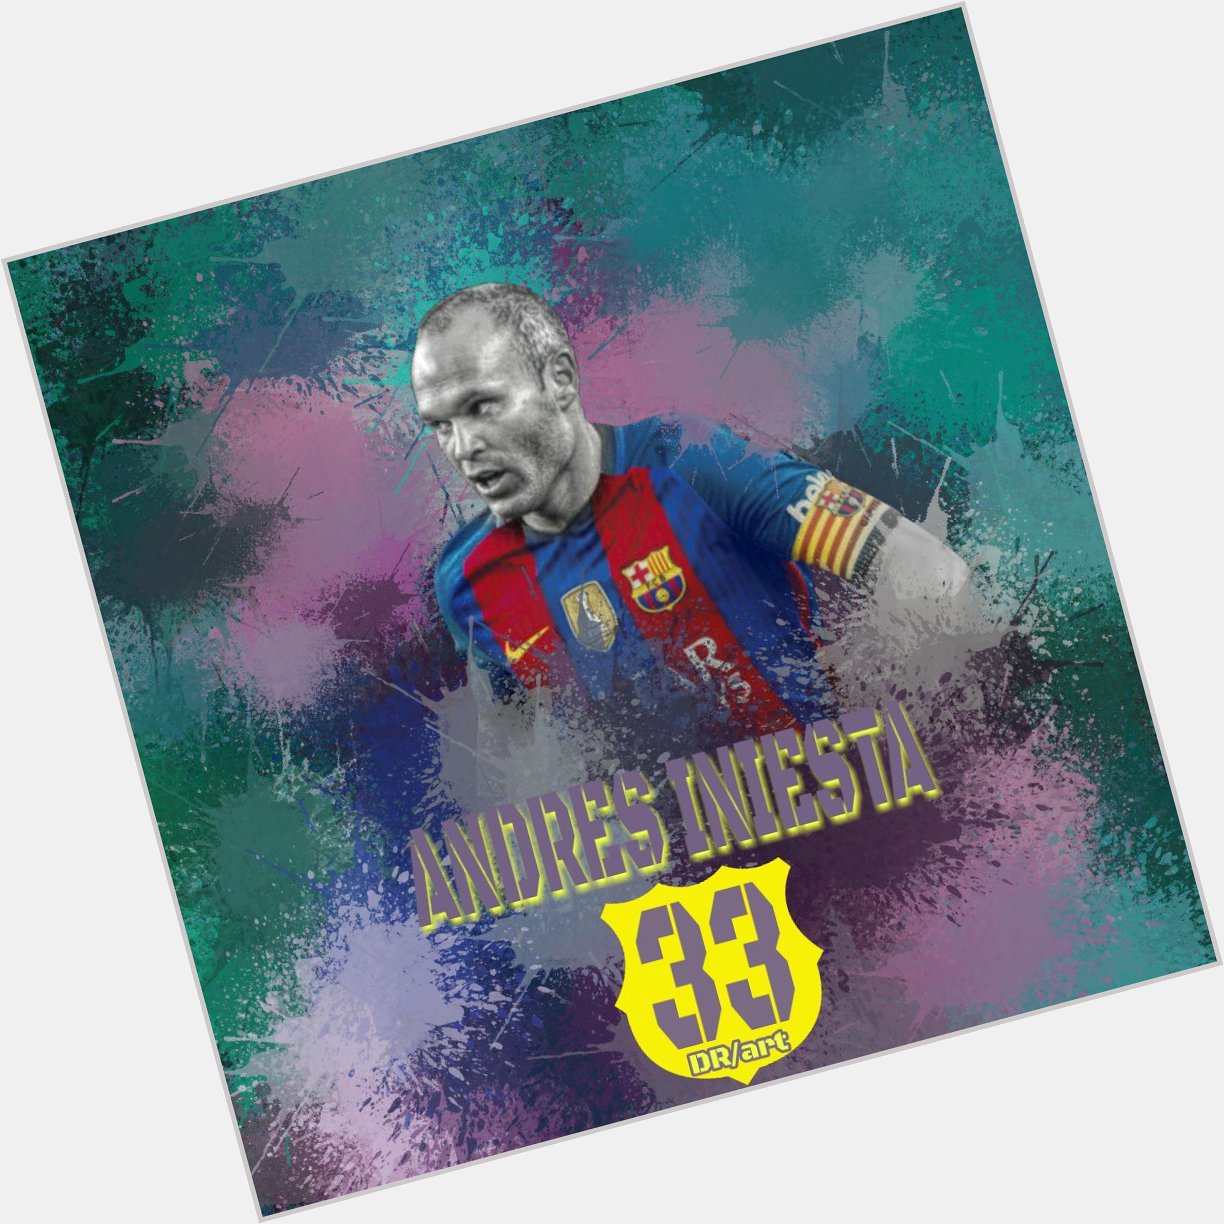 Happy Birthday
El Capita Magicion
Don Andres Iniesta
Is this Legend not red card, Ramos??? 